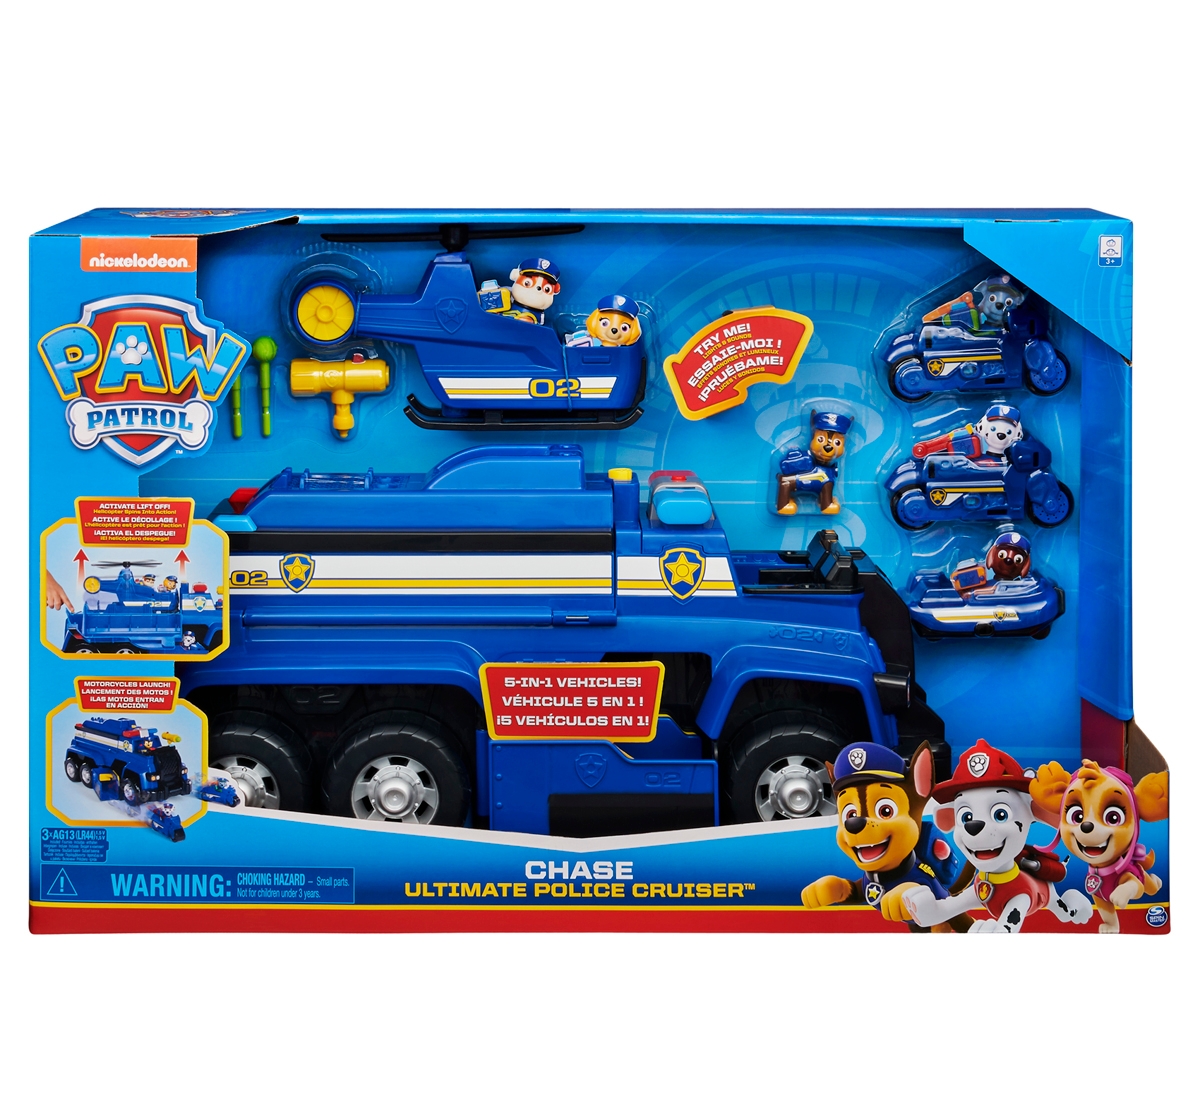 Paw Patrol | Paw Patrol Chase Dluxe Cruser Roleplay Set for Kids 3Y+, Blue 1